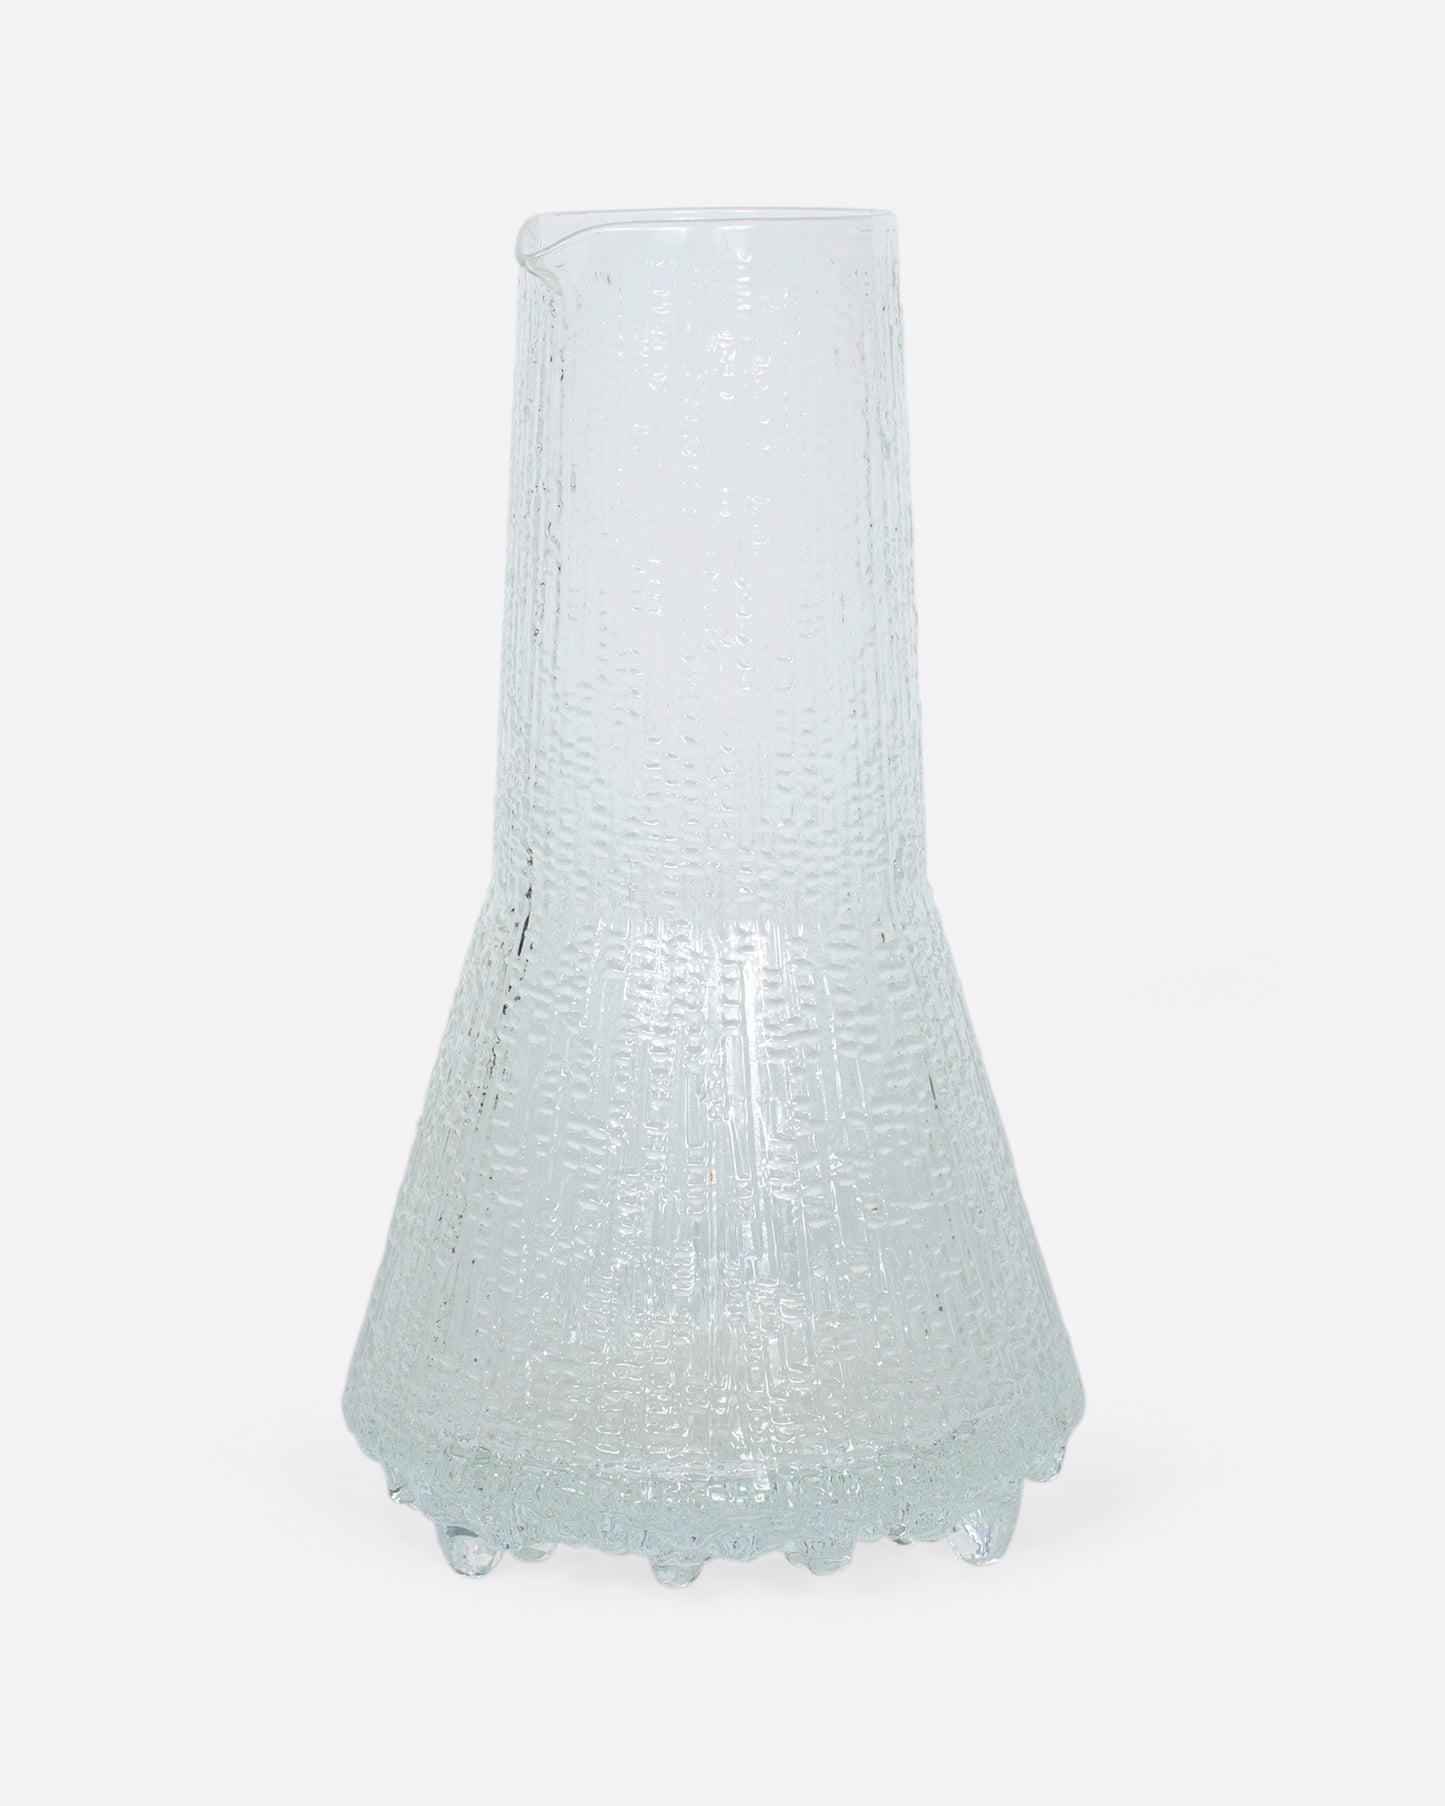 This mid-century, beaker-like piece can be used as a carafe or a vase.